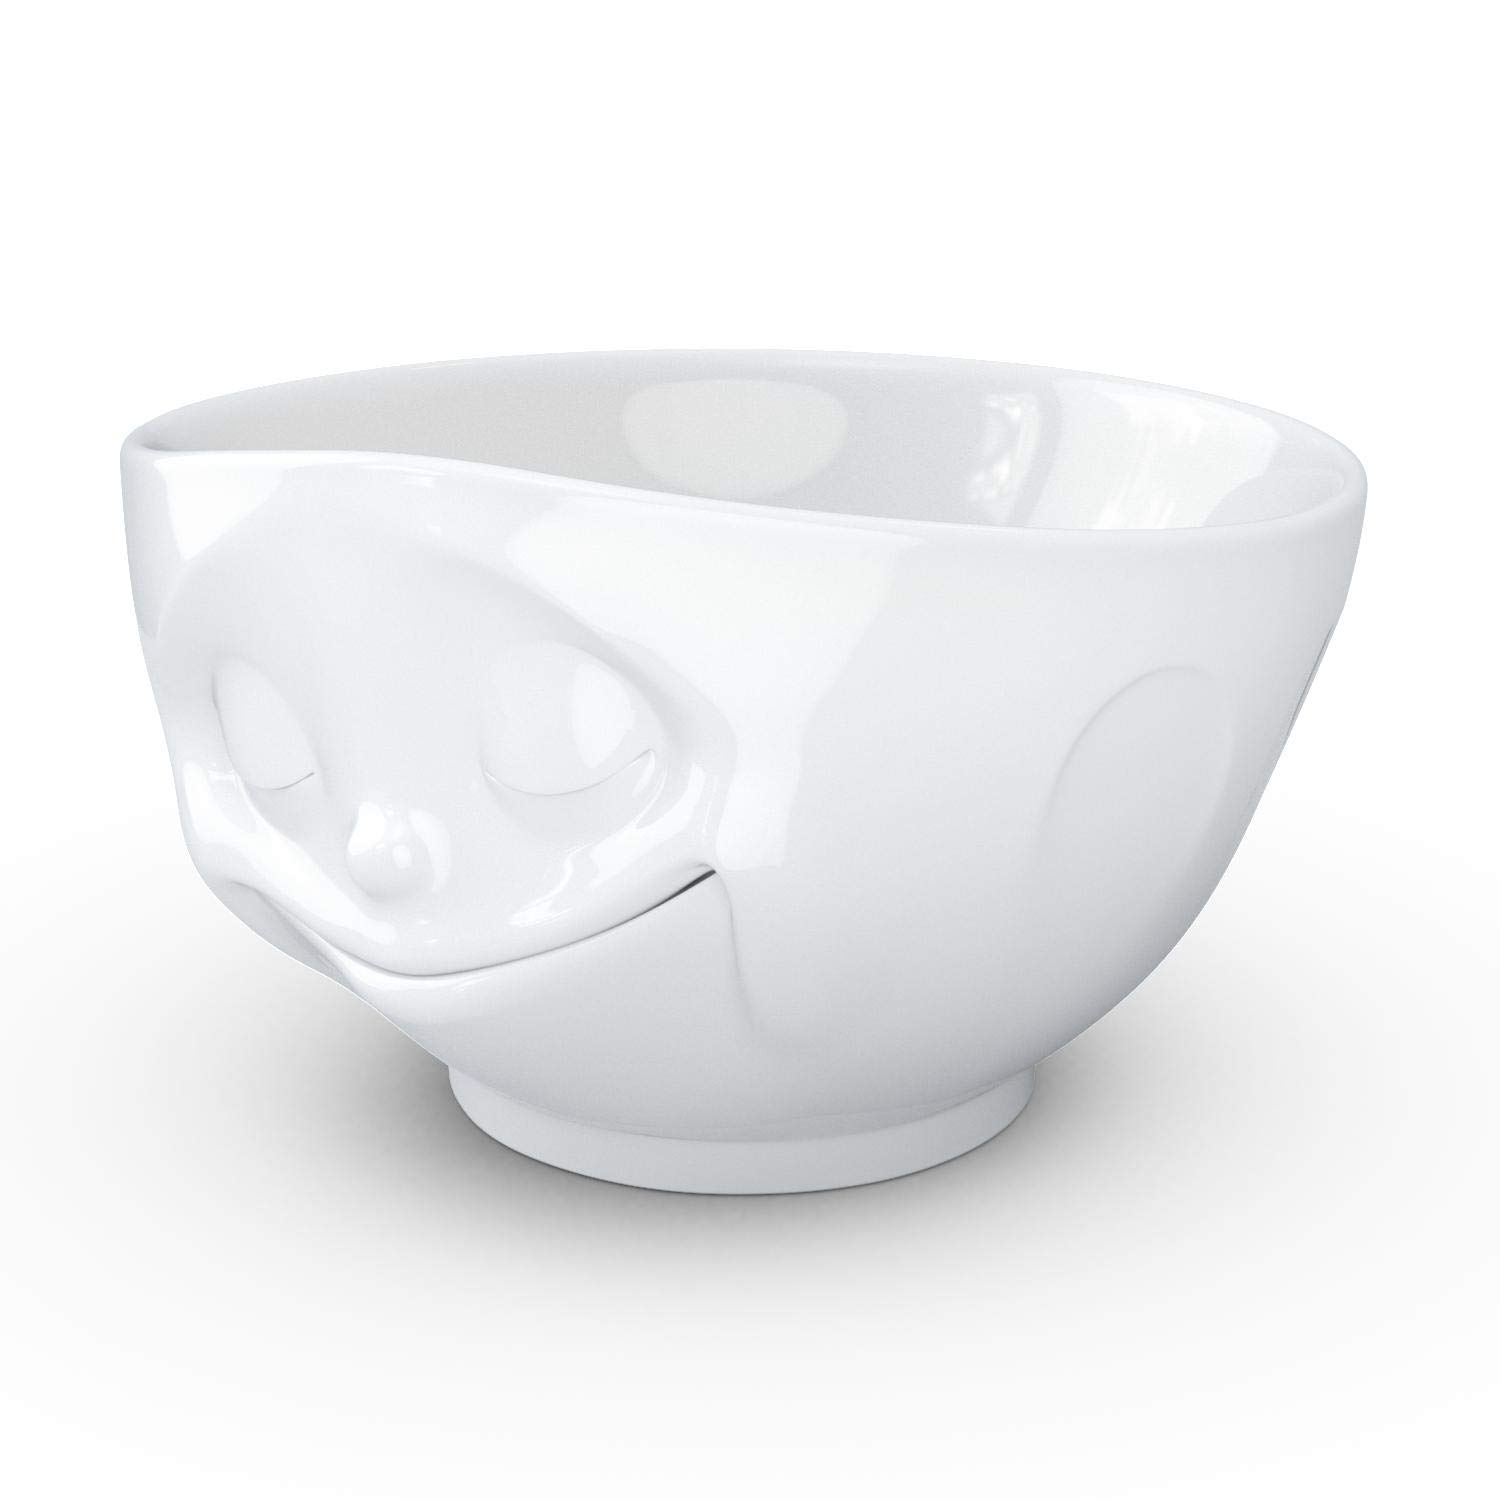 FIFTYEIGHT PRODUCTS TASSEN Porcelain Bowl, Happy Face Edition, 16 oz. White, (Single Bowl) for Serving Cereal, Soup